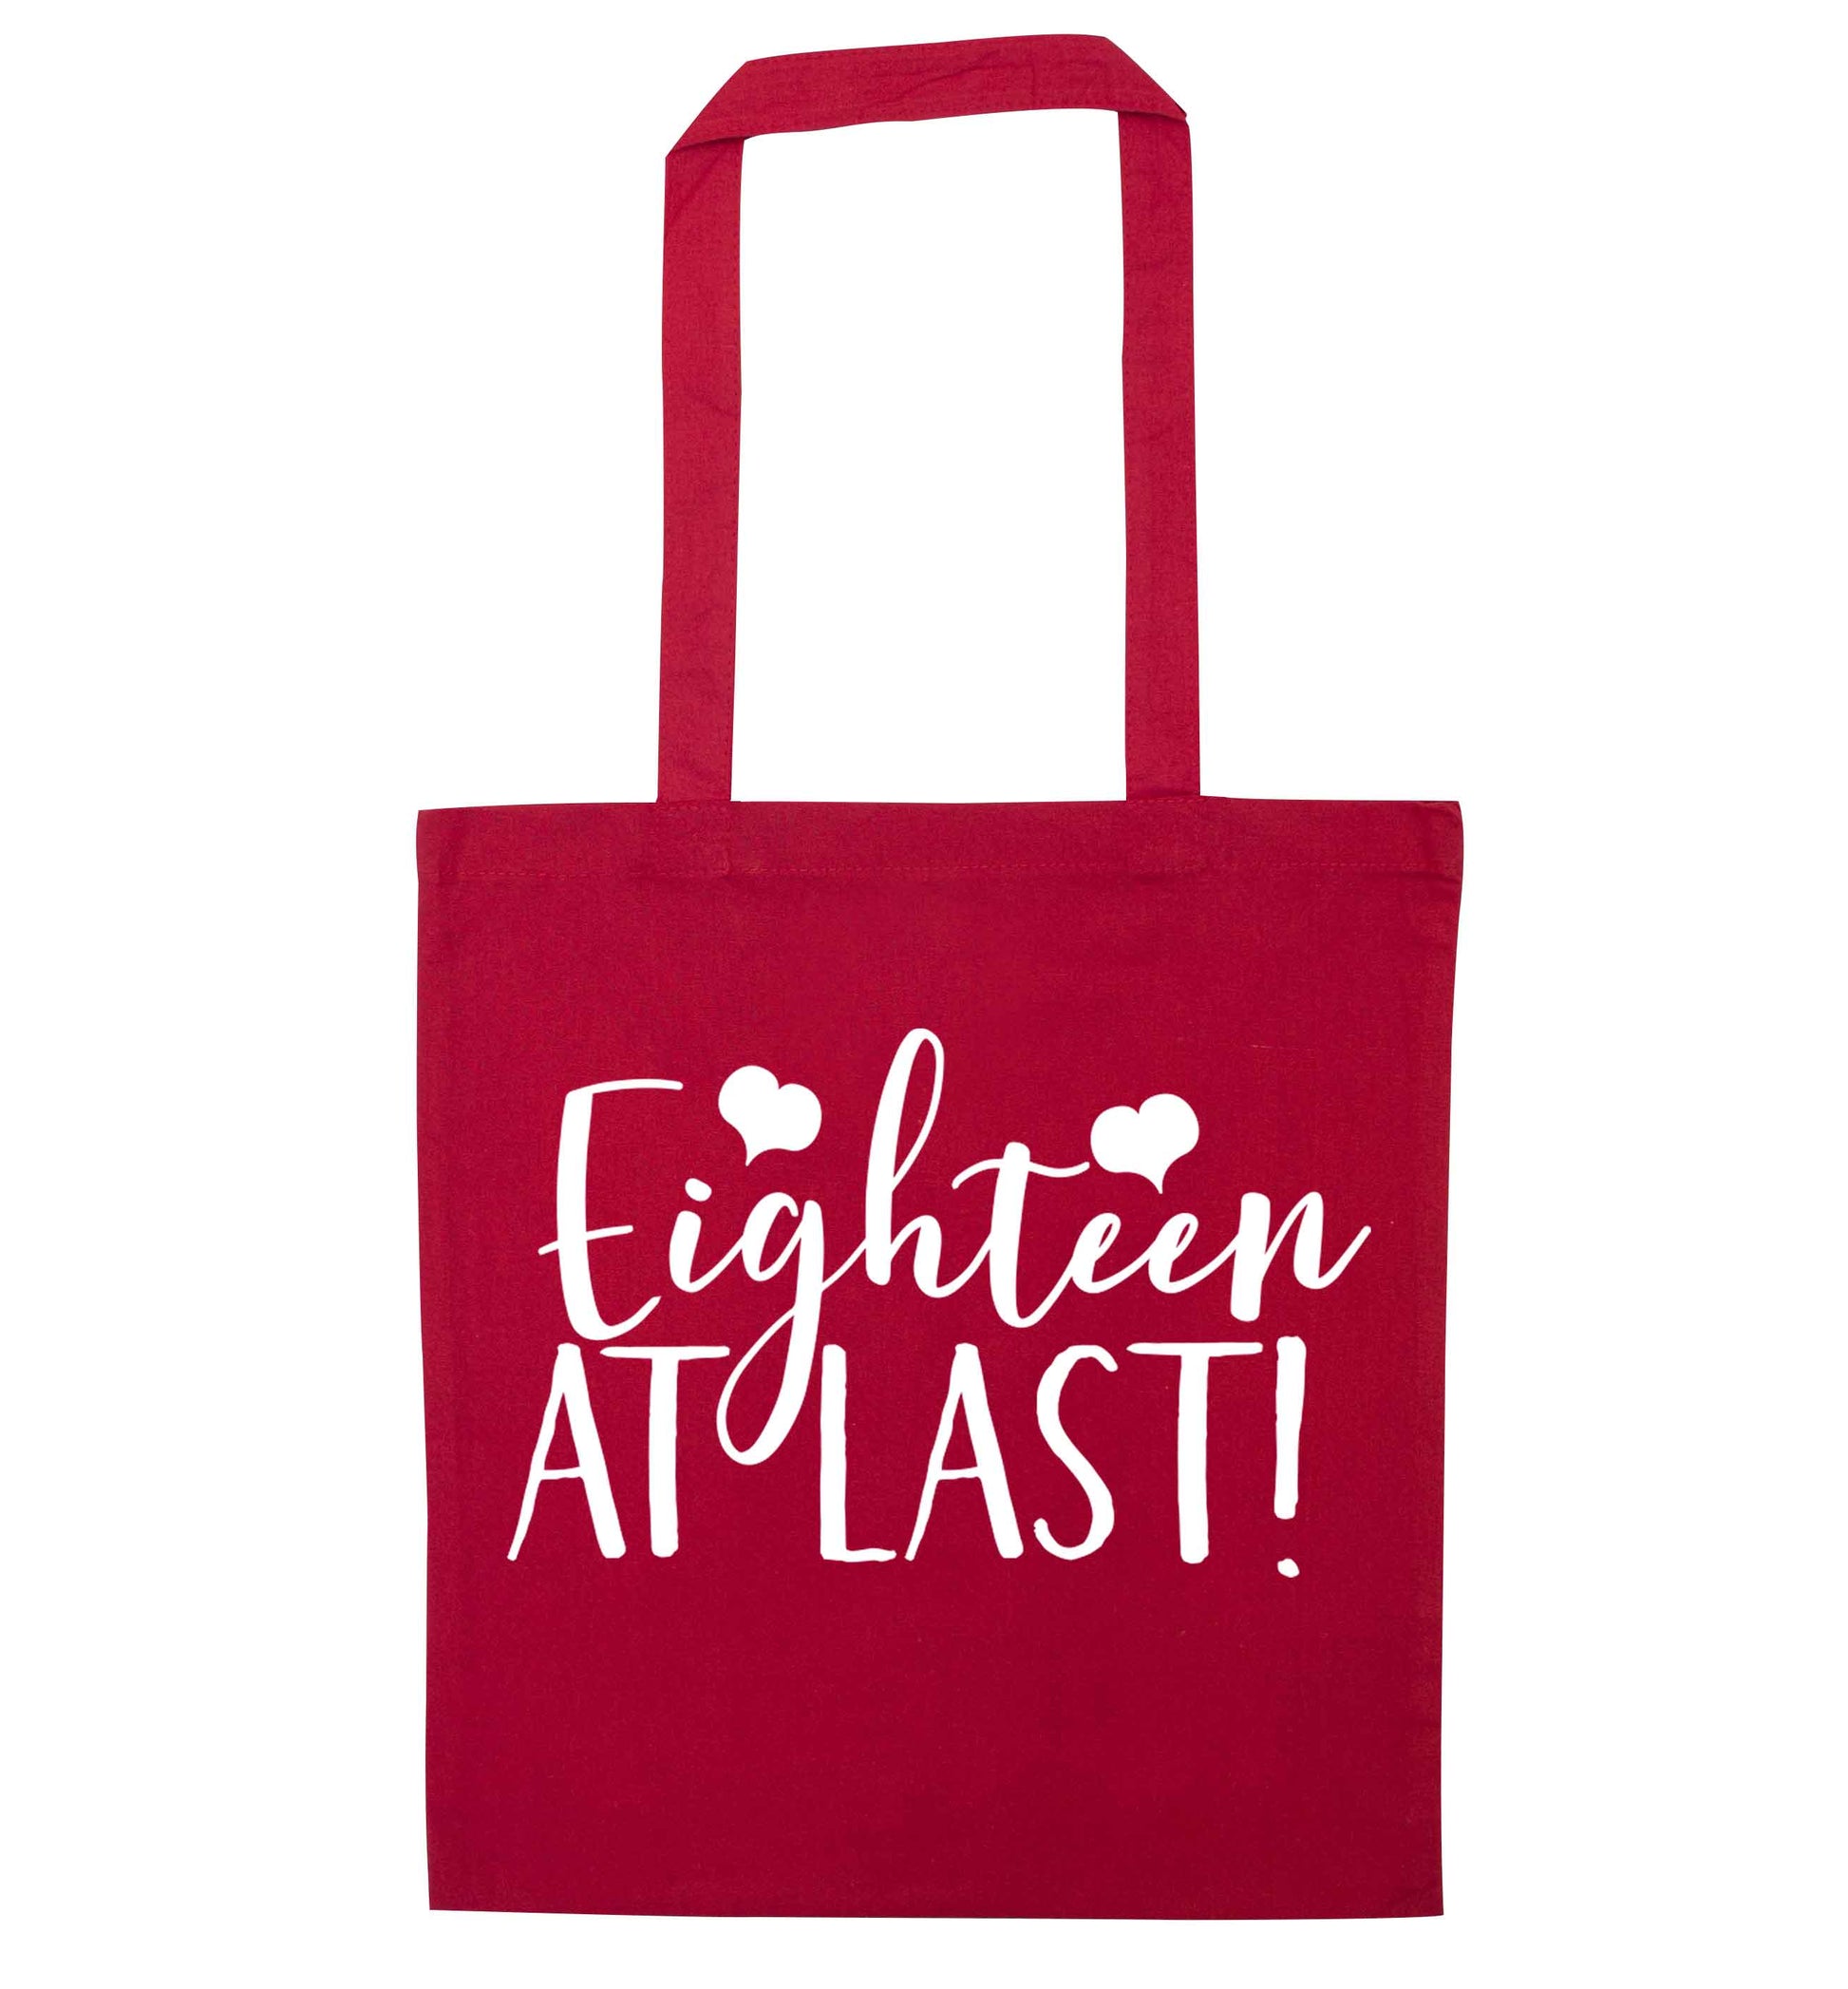 Eighteen at last!red tote bag